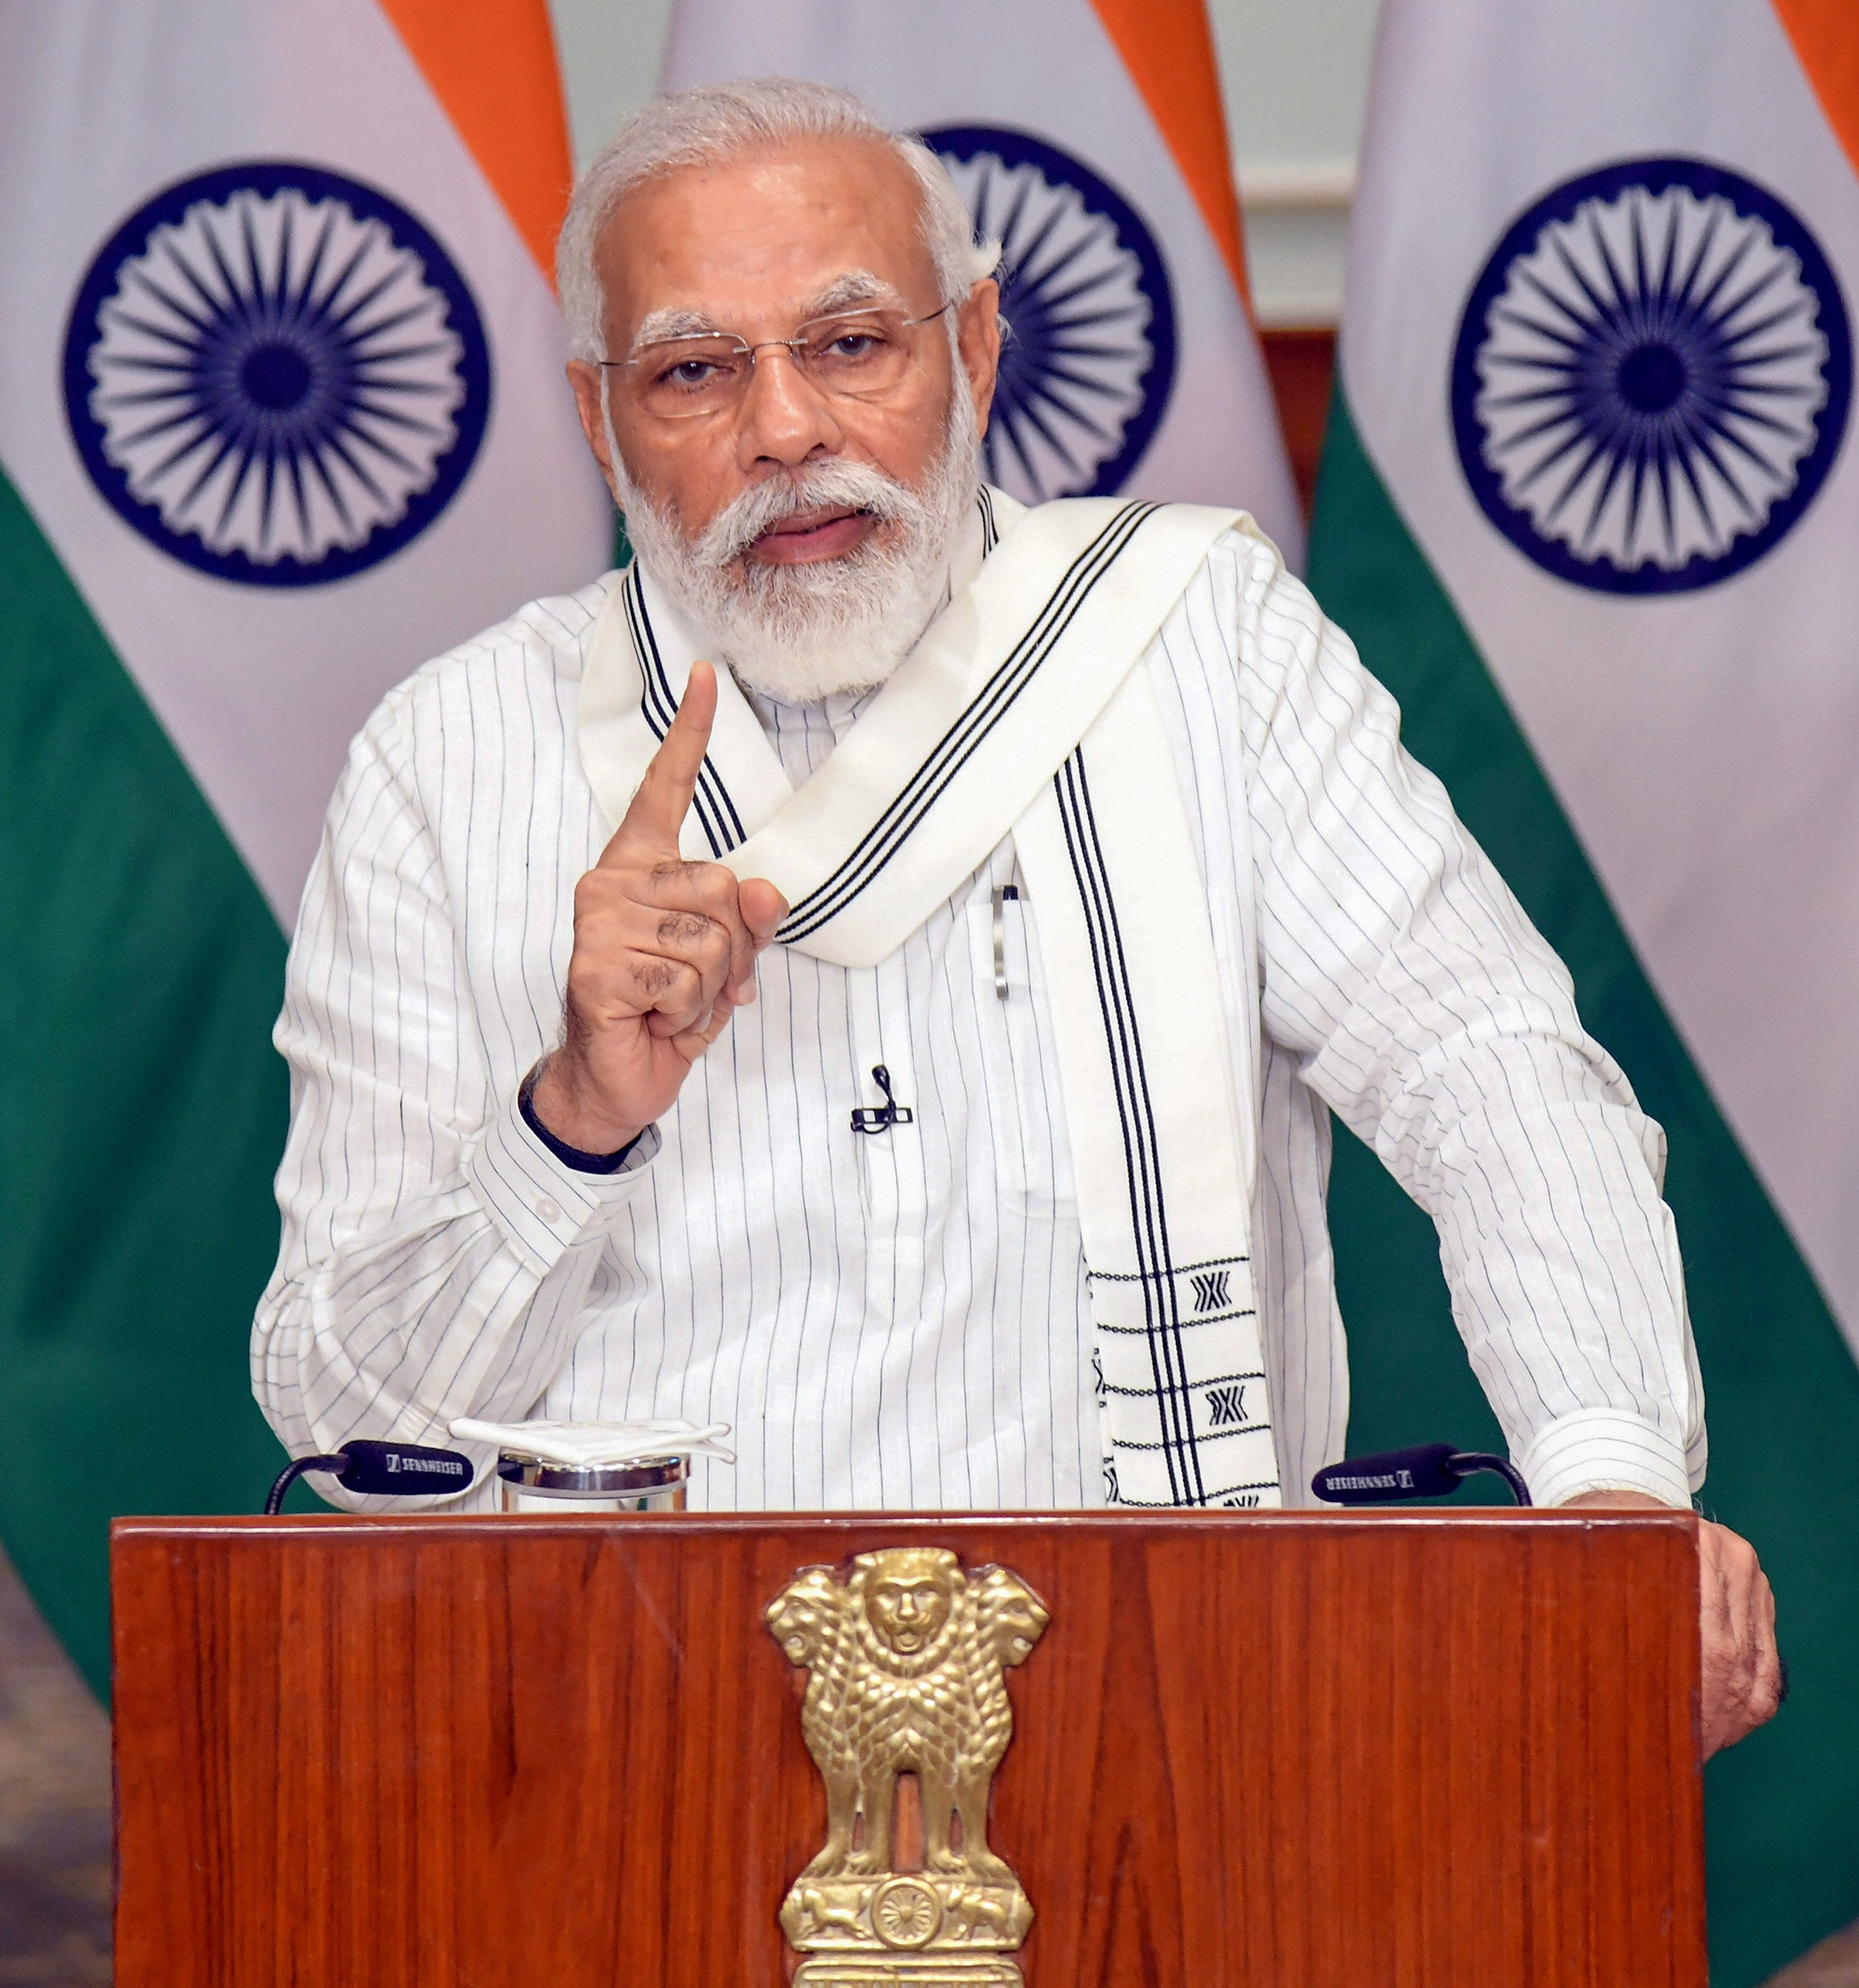 Sharing statistics of various countries, Modi said India had performed much better in the fight against the coronavirus disease (Covid-19). Credit: PTI Photo